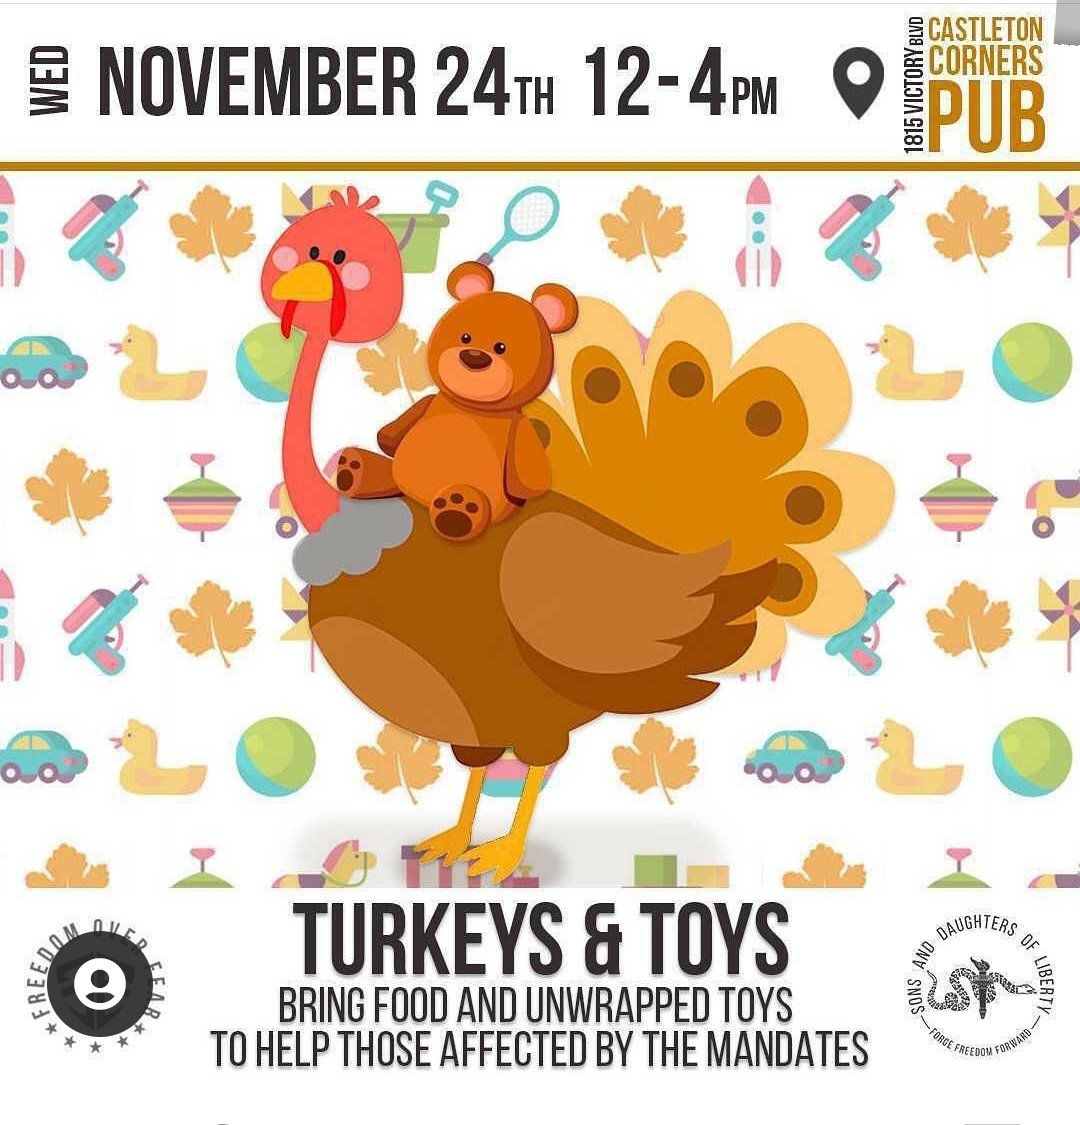 $2 #donations and/or please #share this. Raising money for #Turkeys & #Toys gf.me/u/2psdcm